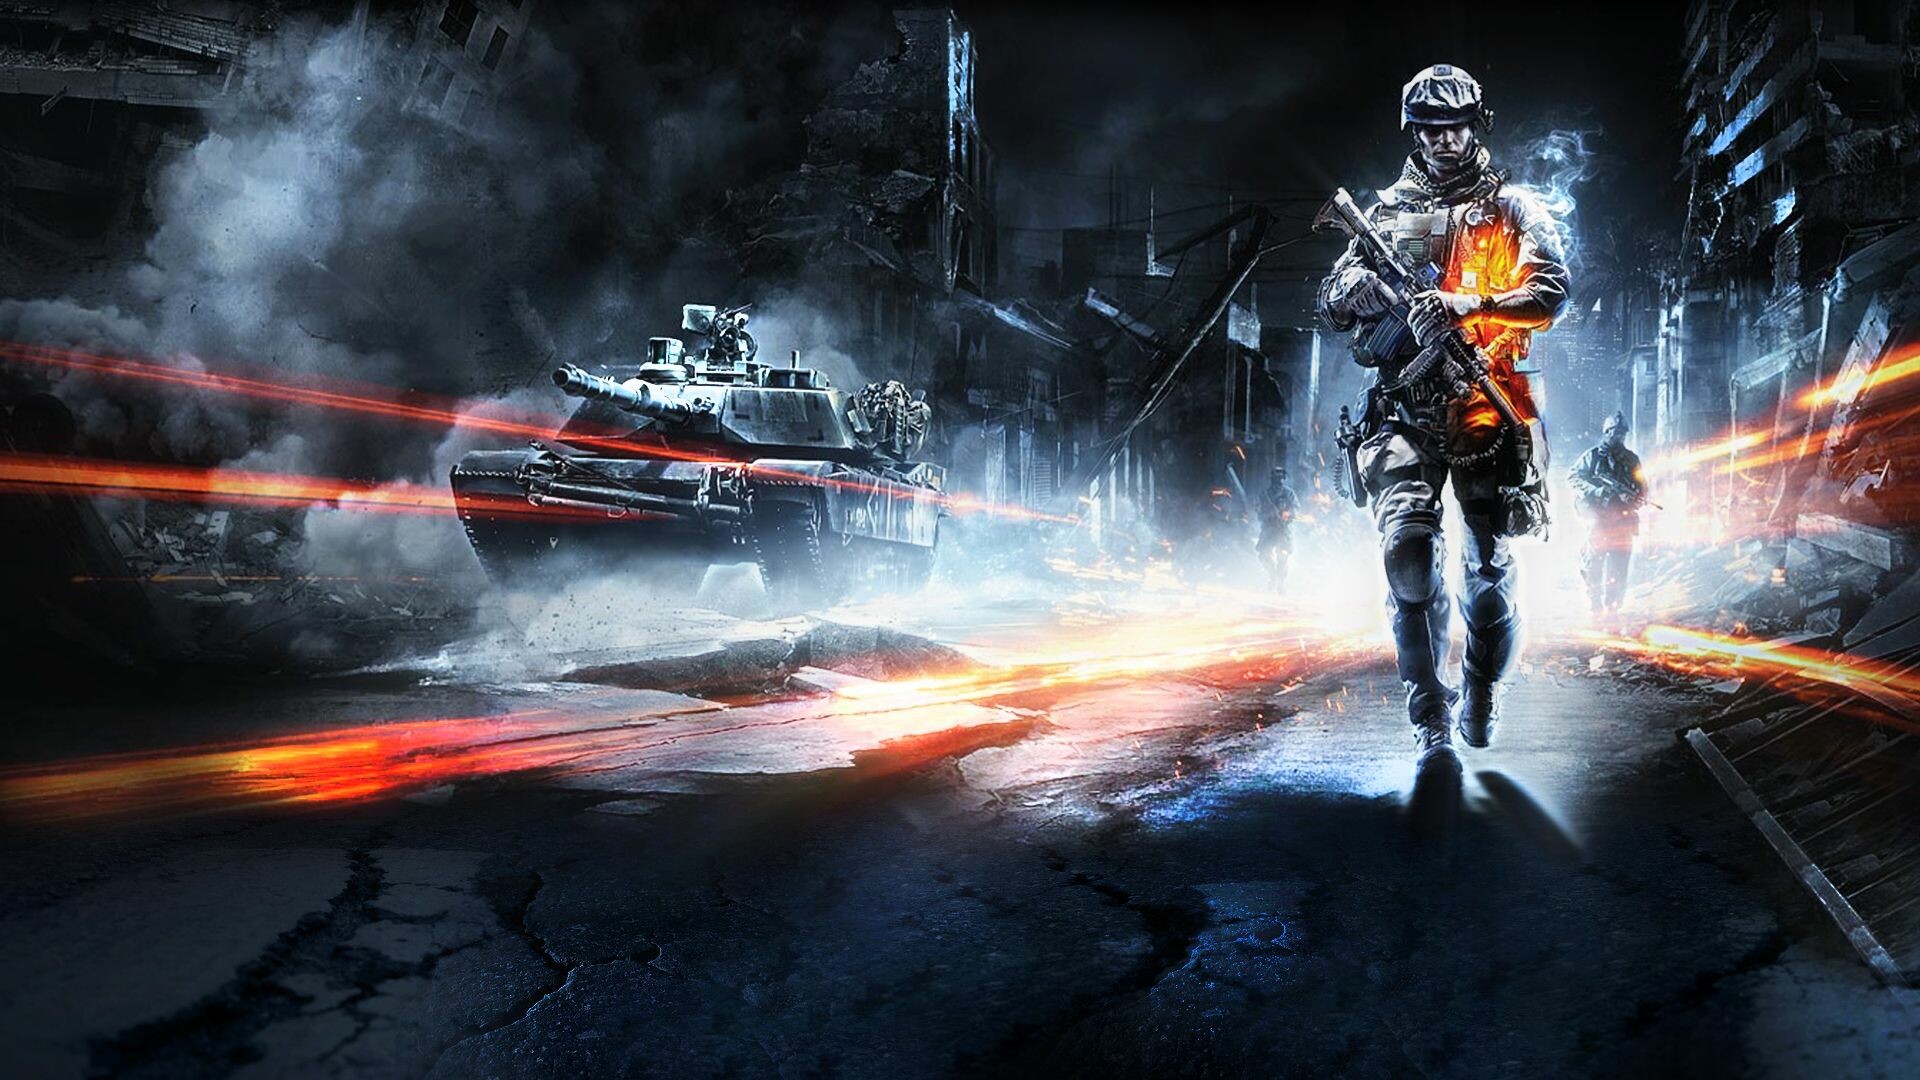 Battlefield 3: A first-person shooter action video game, BF3. 1920x1080 Full HD Wallpaper.